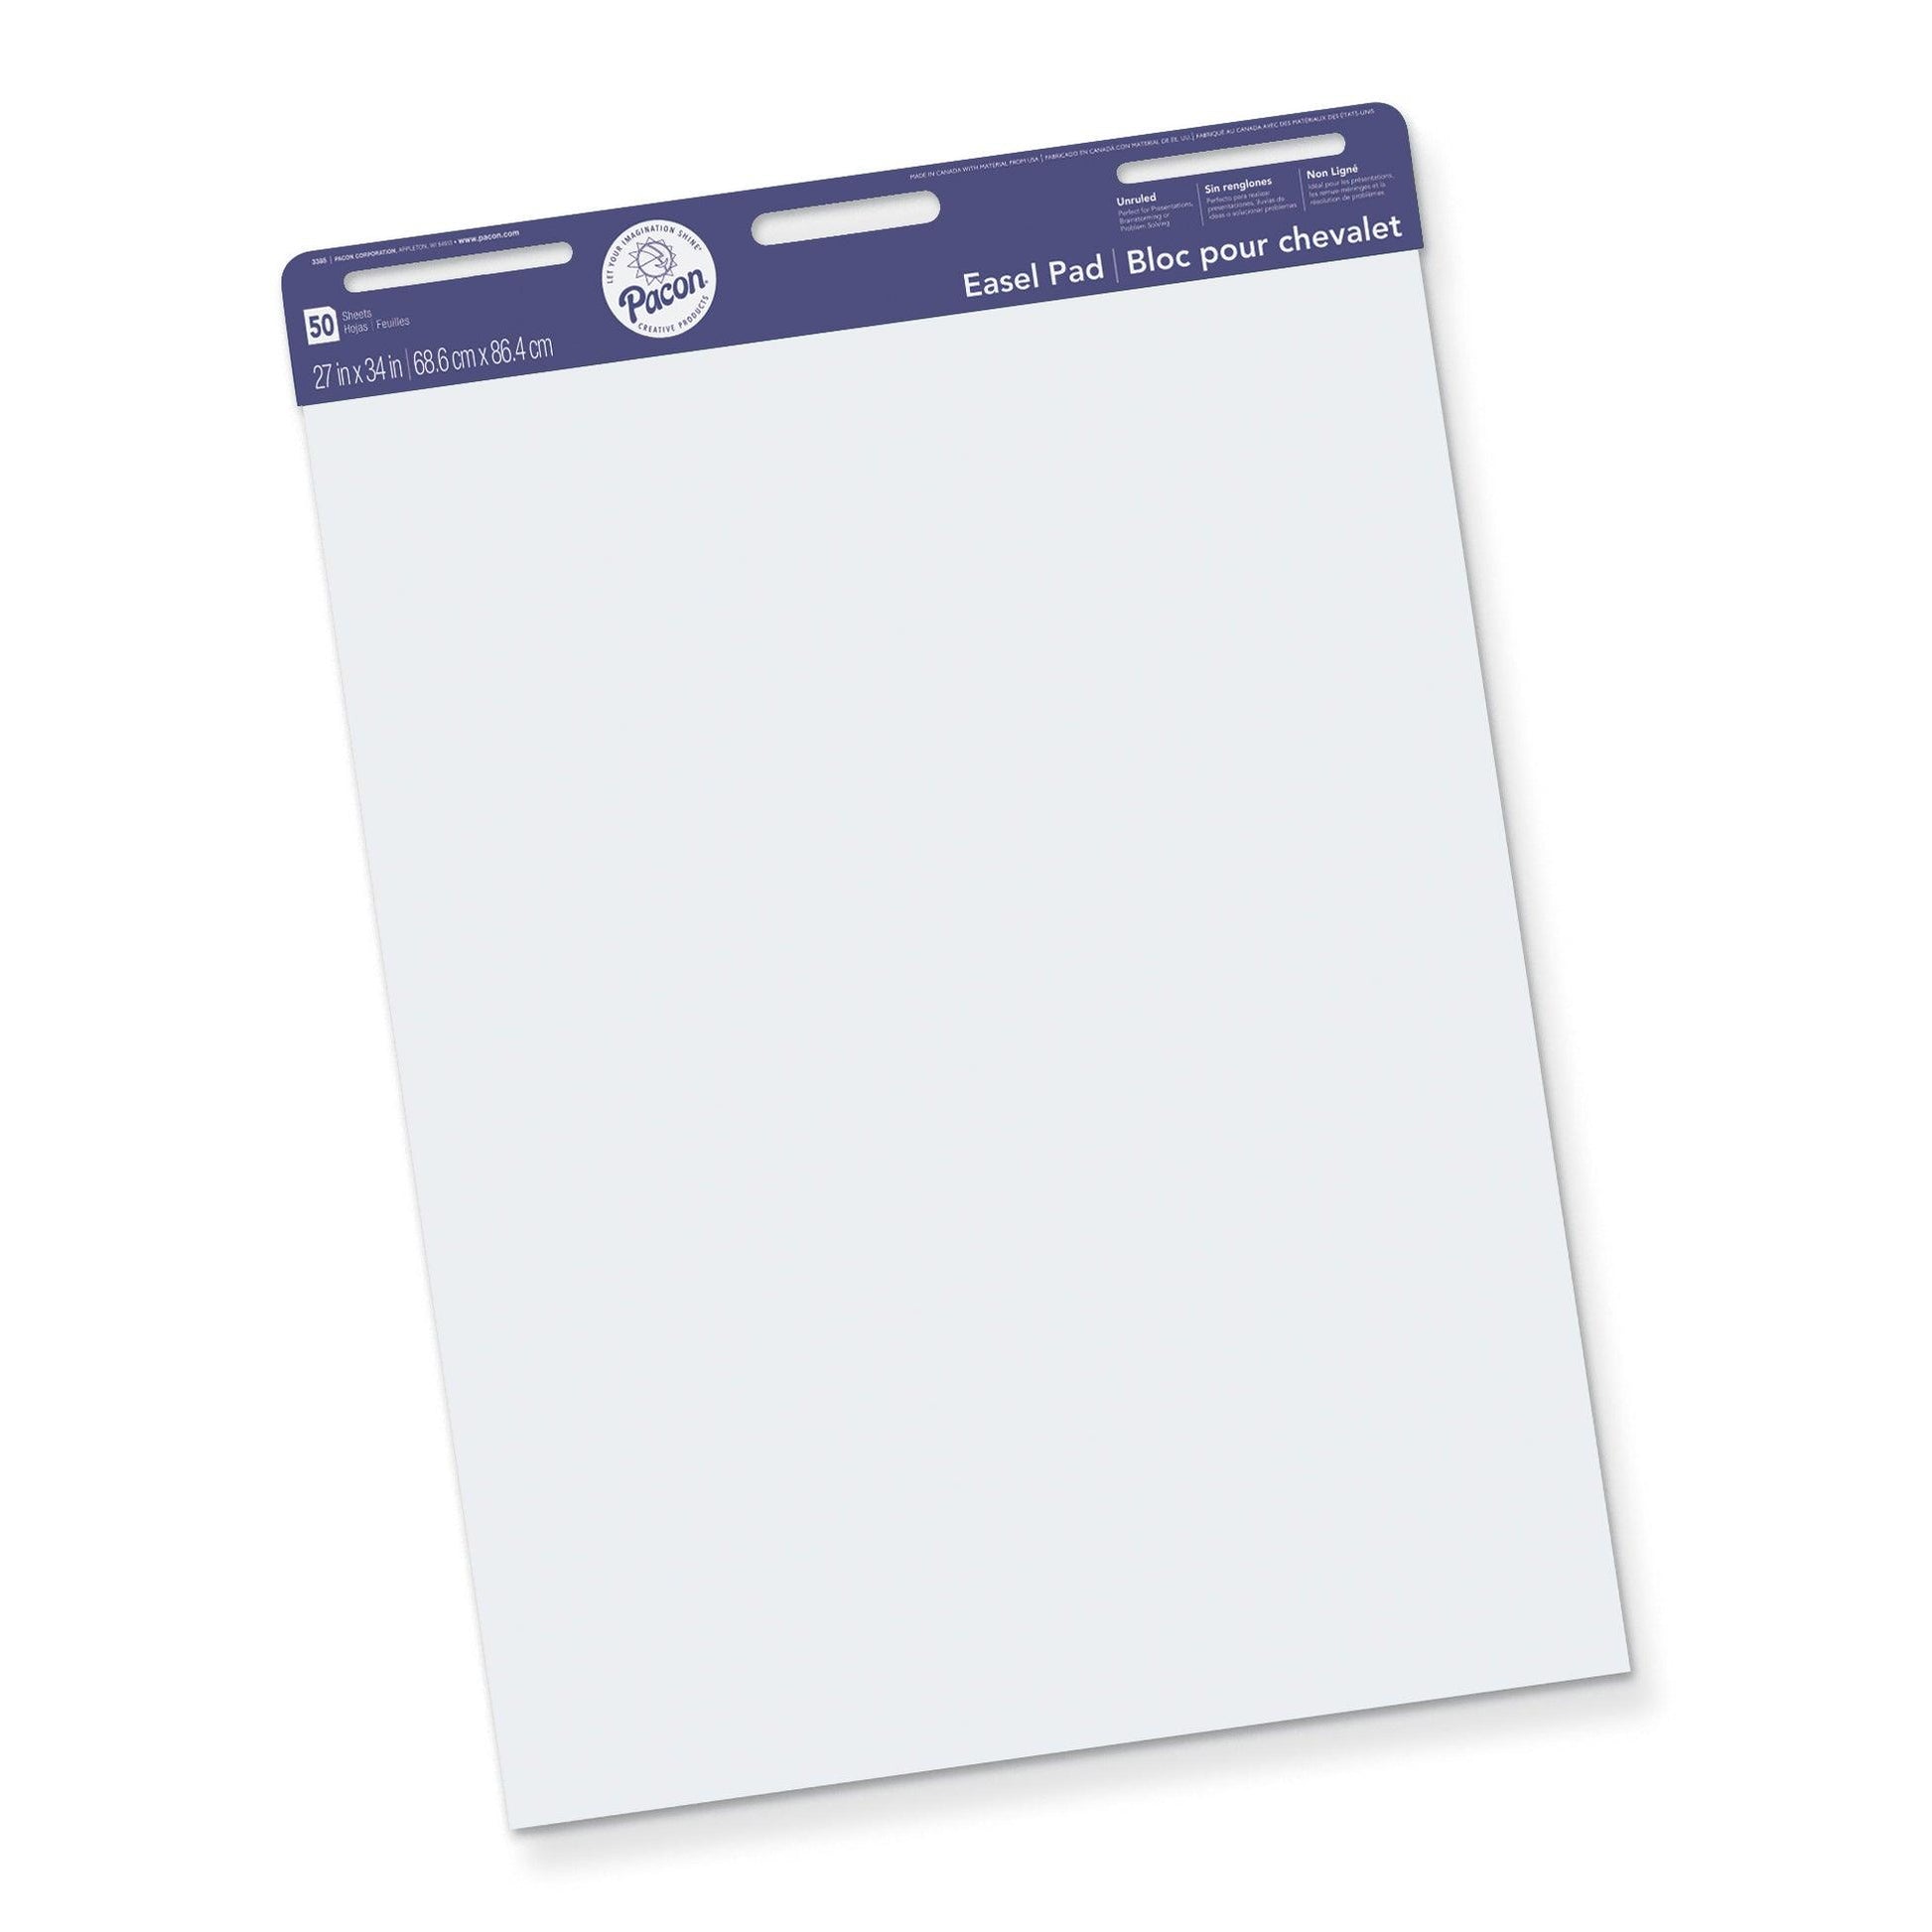 Easel Pad, Non-Adhesive, White, Unruled 27" x 34", 50 Sheets - Loomini